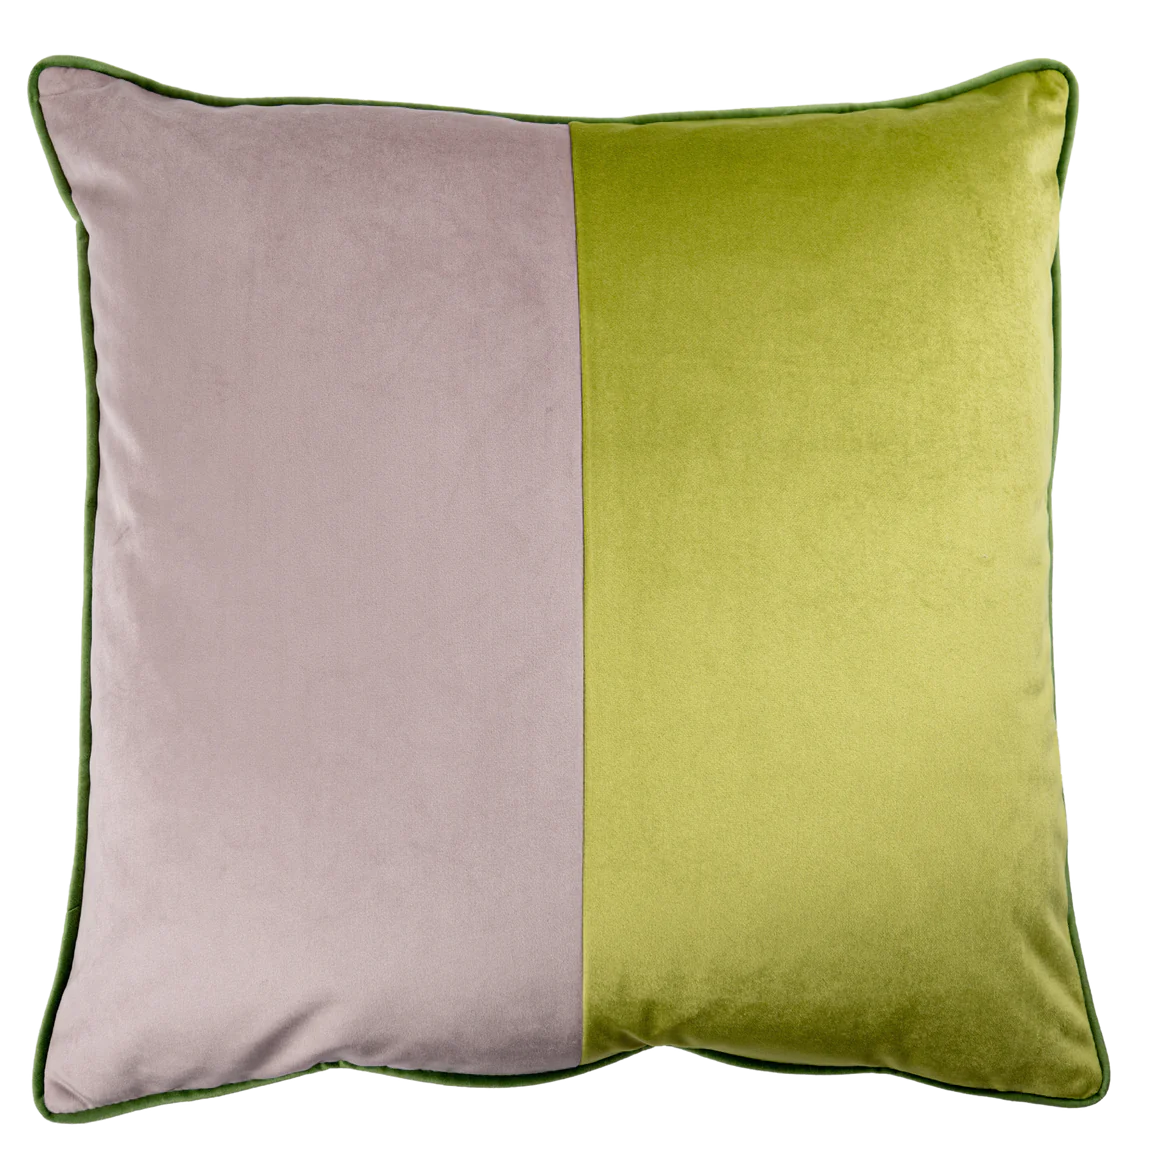 Andrews Pillow - Orchid/Wasabi/Lima